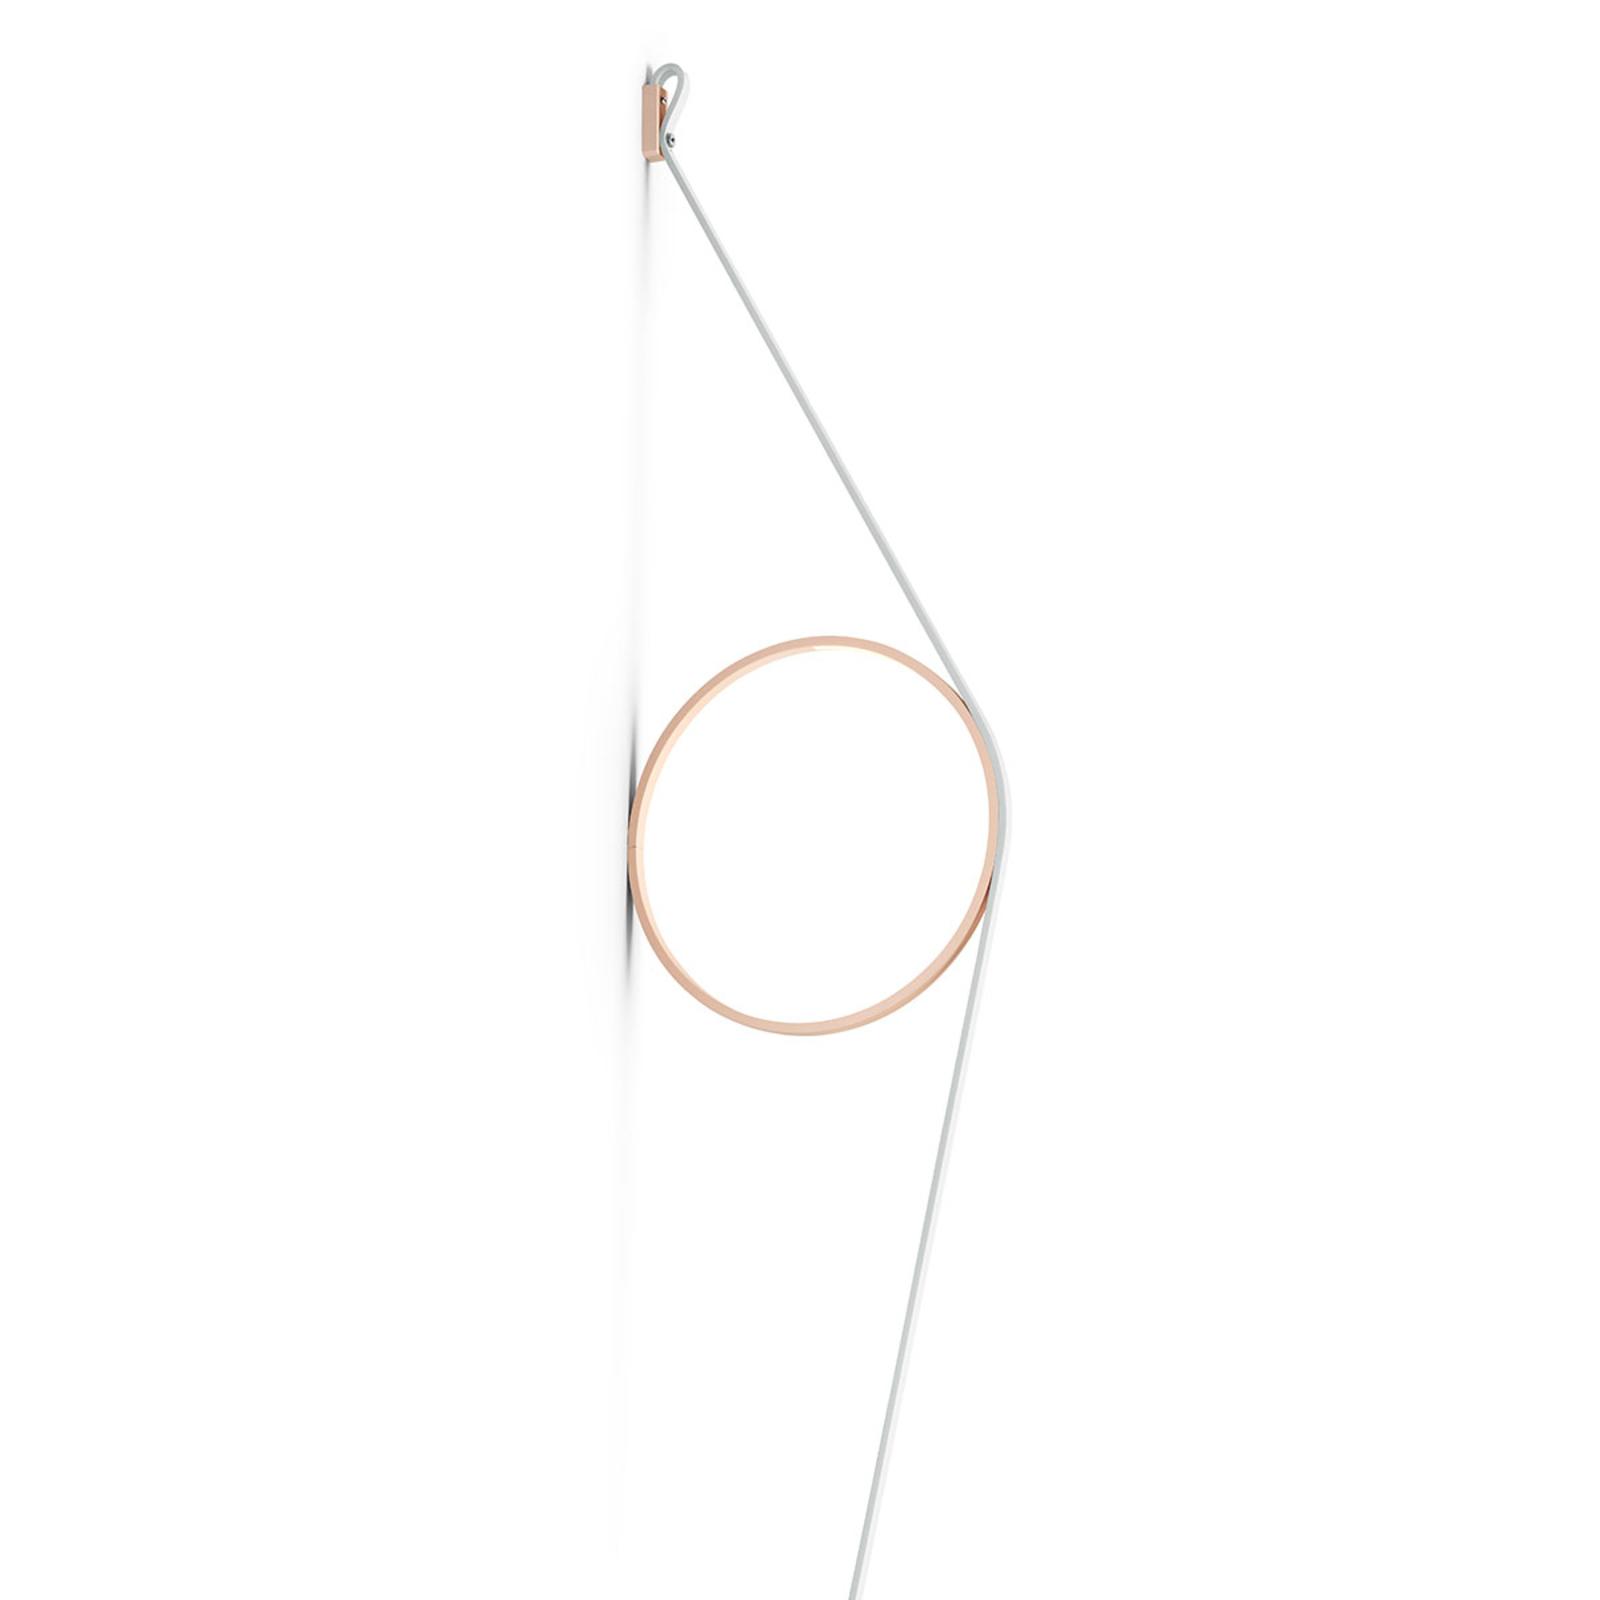 FLOS Wirering white LED wall light, ring magenta